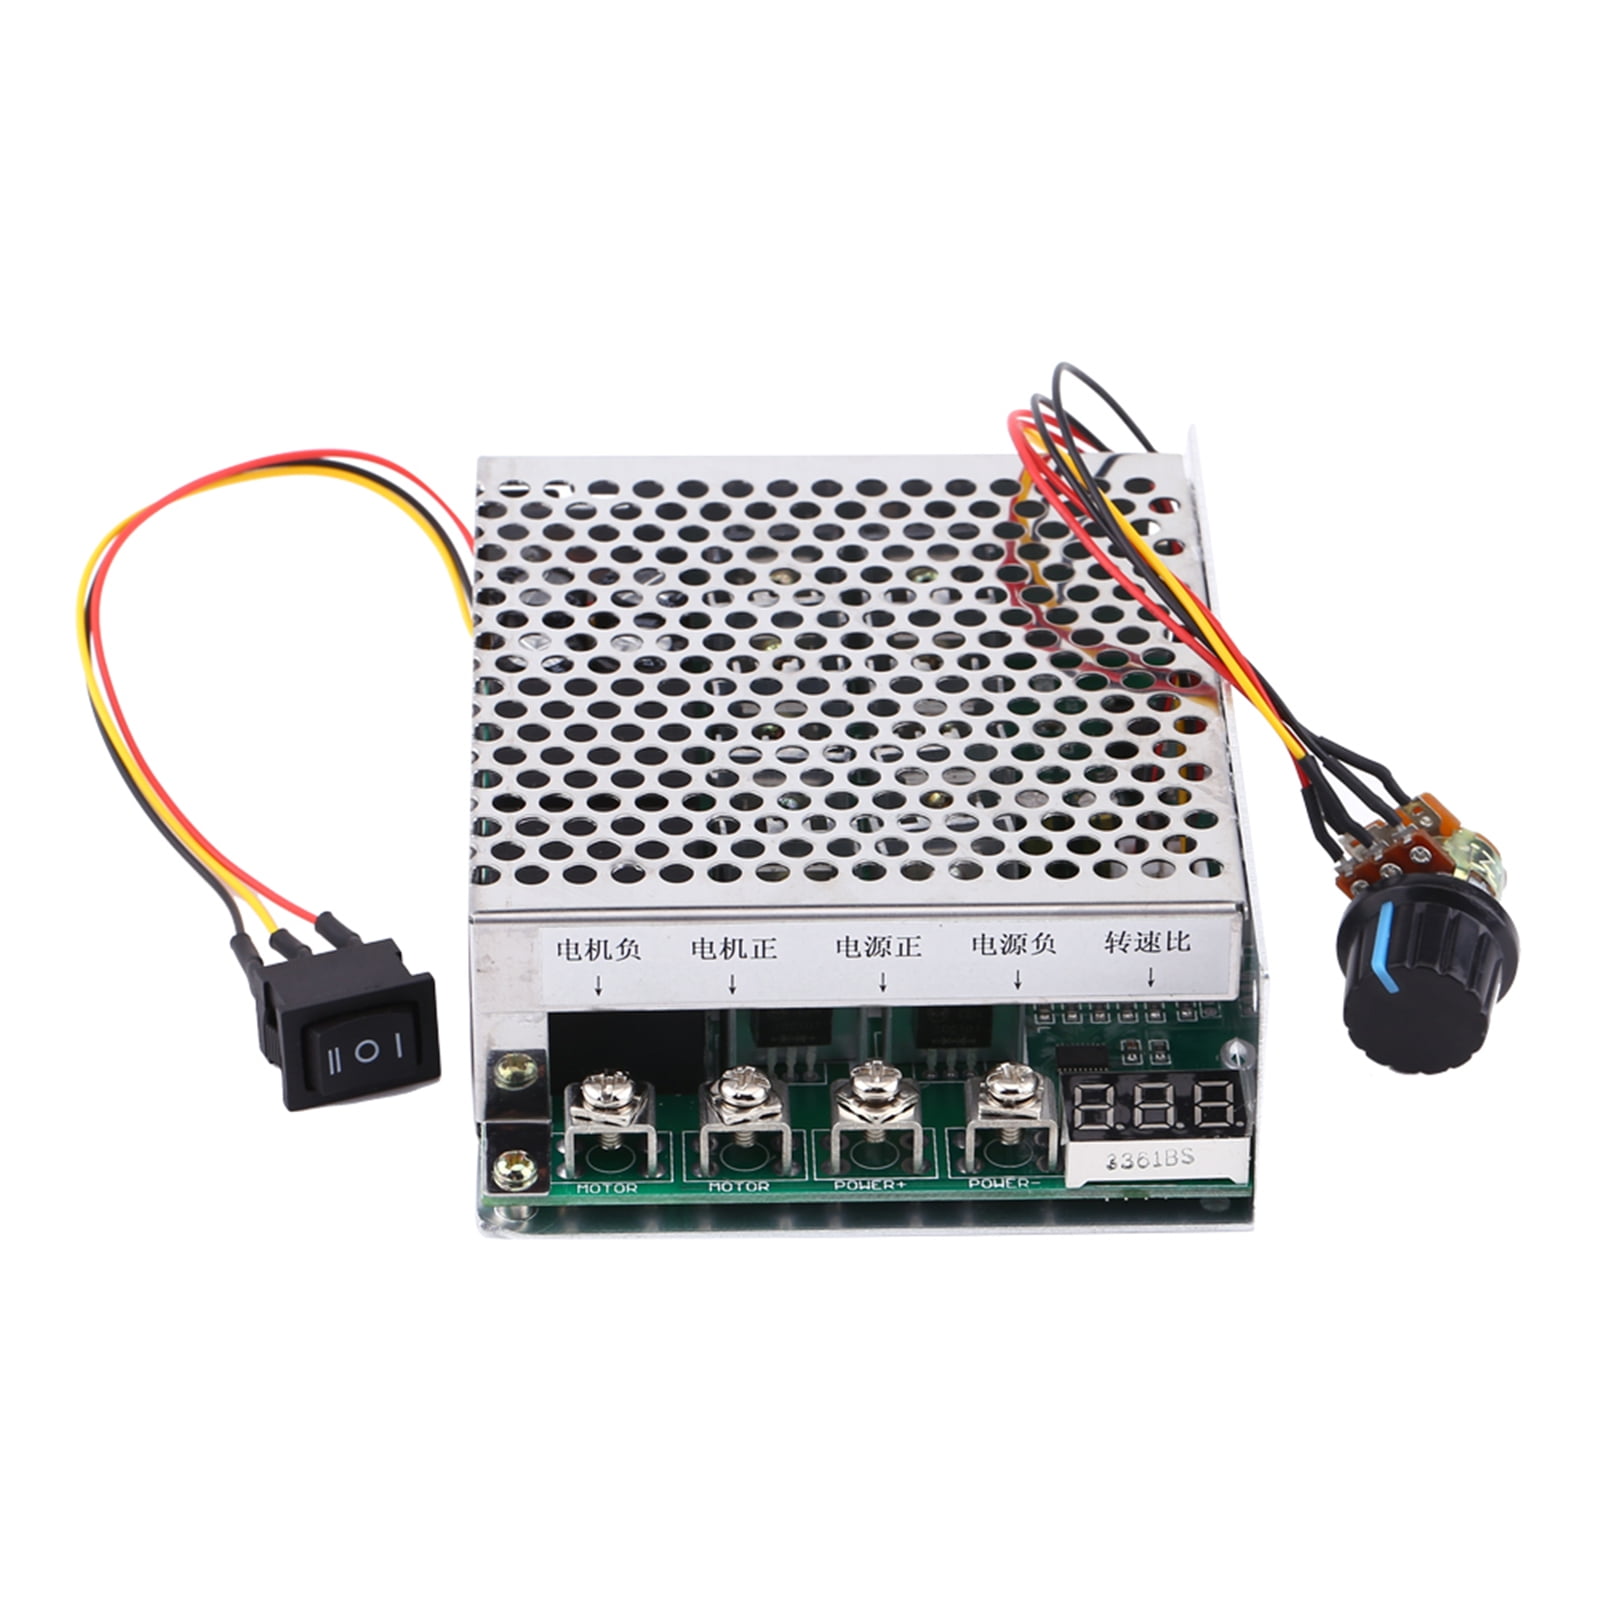 Details about   DC Motor Governor With Digital Display Screen Supports Stepless Speed Regulation 